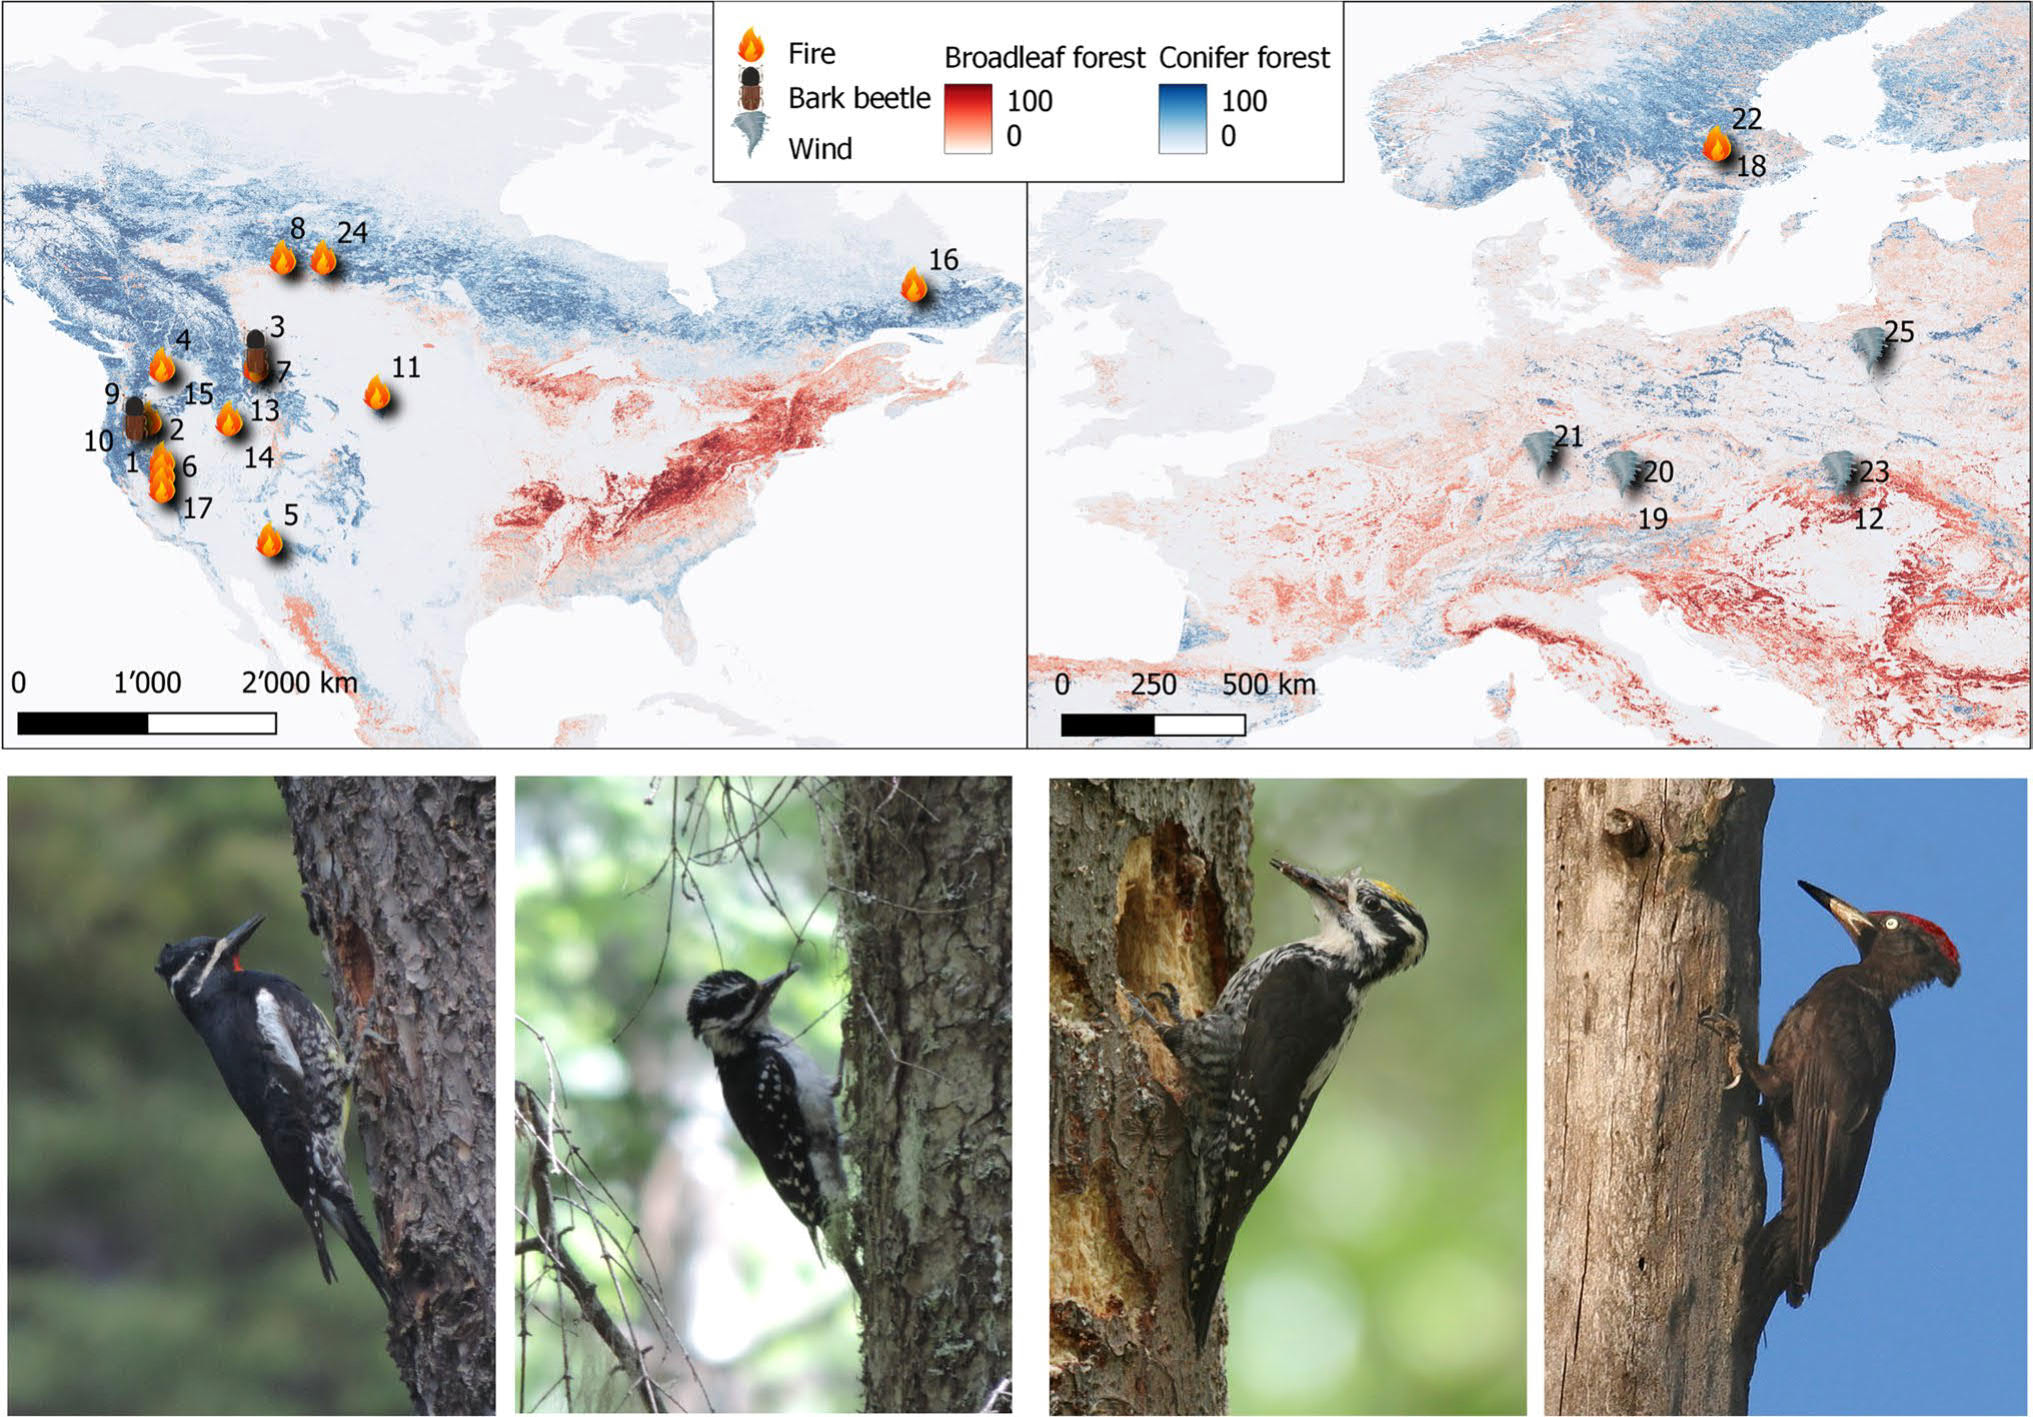 Salvage Logging Strongly Affects Woodpecker Abundance and Reproduction: a Meta-analysis